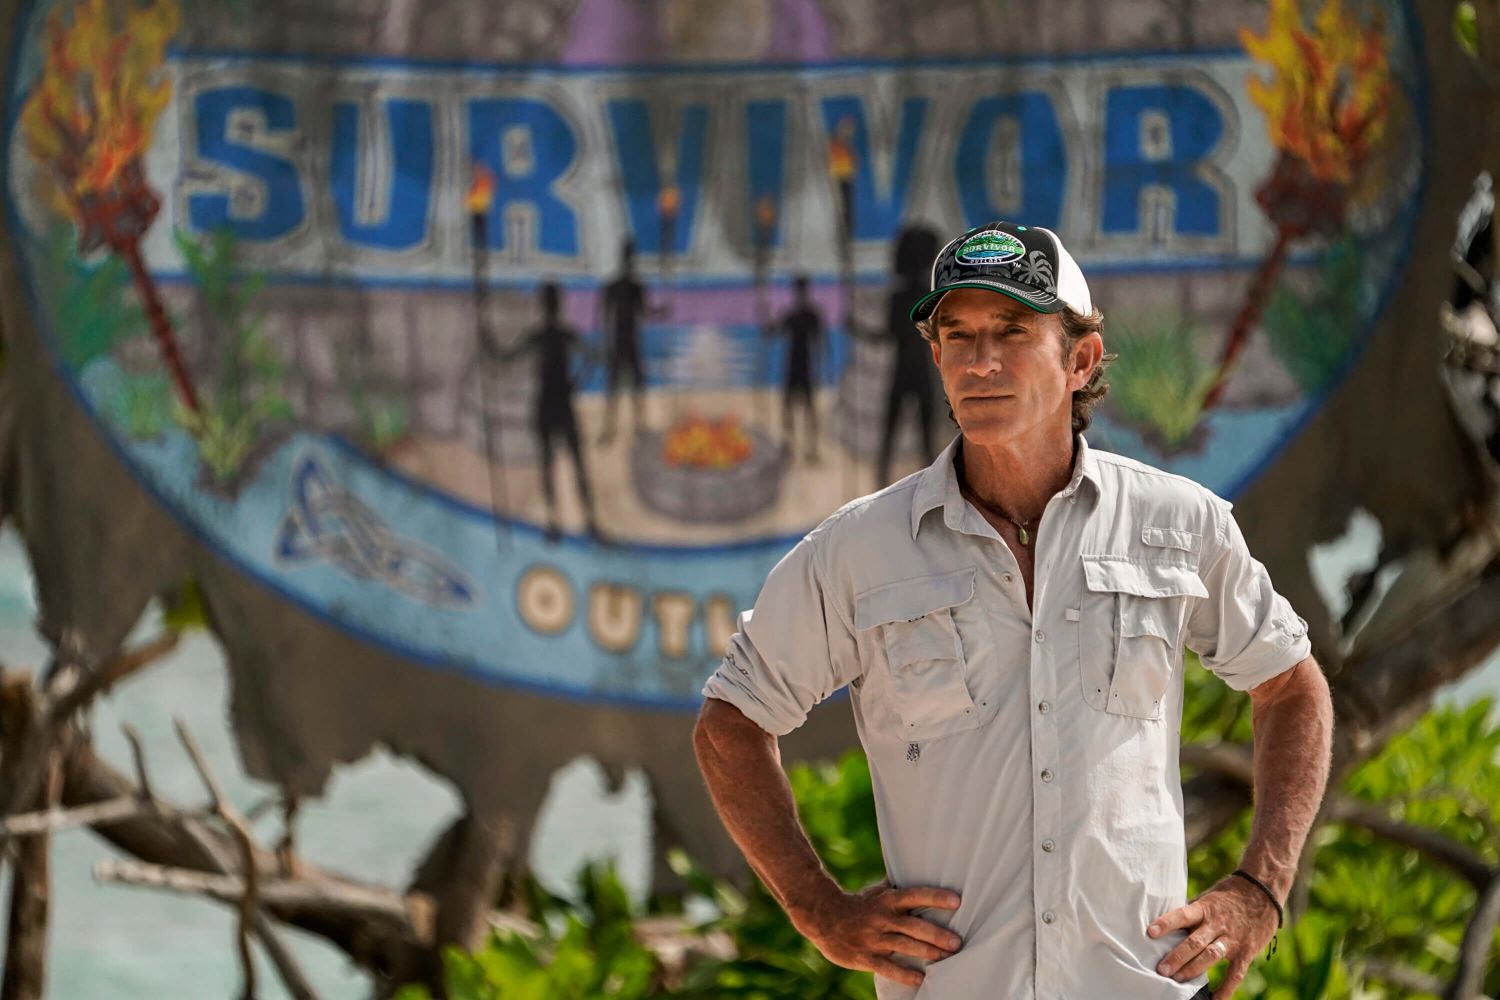 Jeff Probst, who previously confirmed the 'Survivor 44' showmance spoilers, wears a light gray button-up shirt with rolled-up sleeves and a black, white, and green 'Survivor' baseball cap.